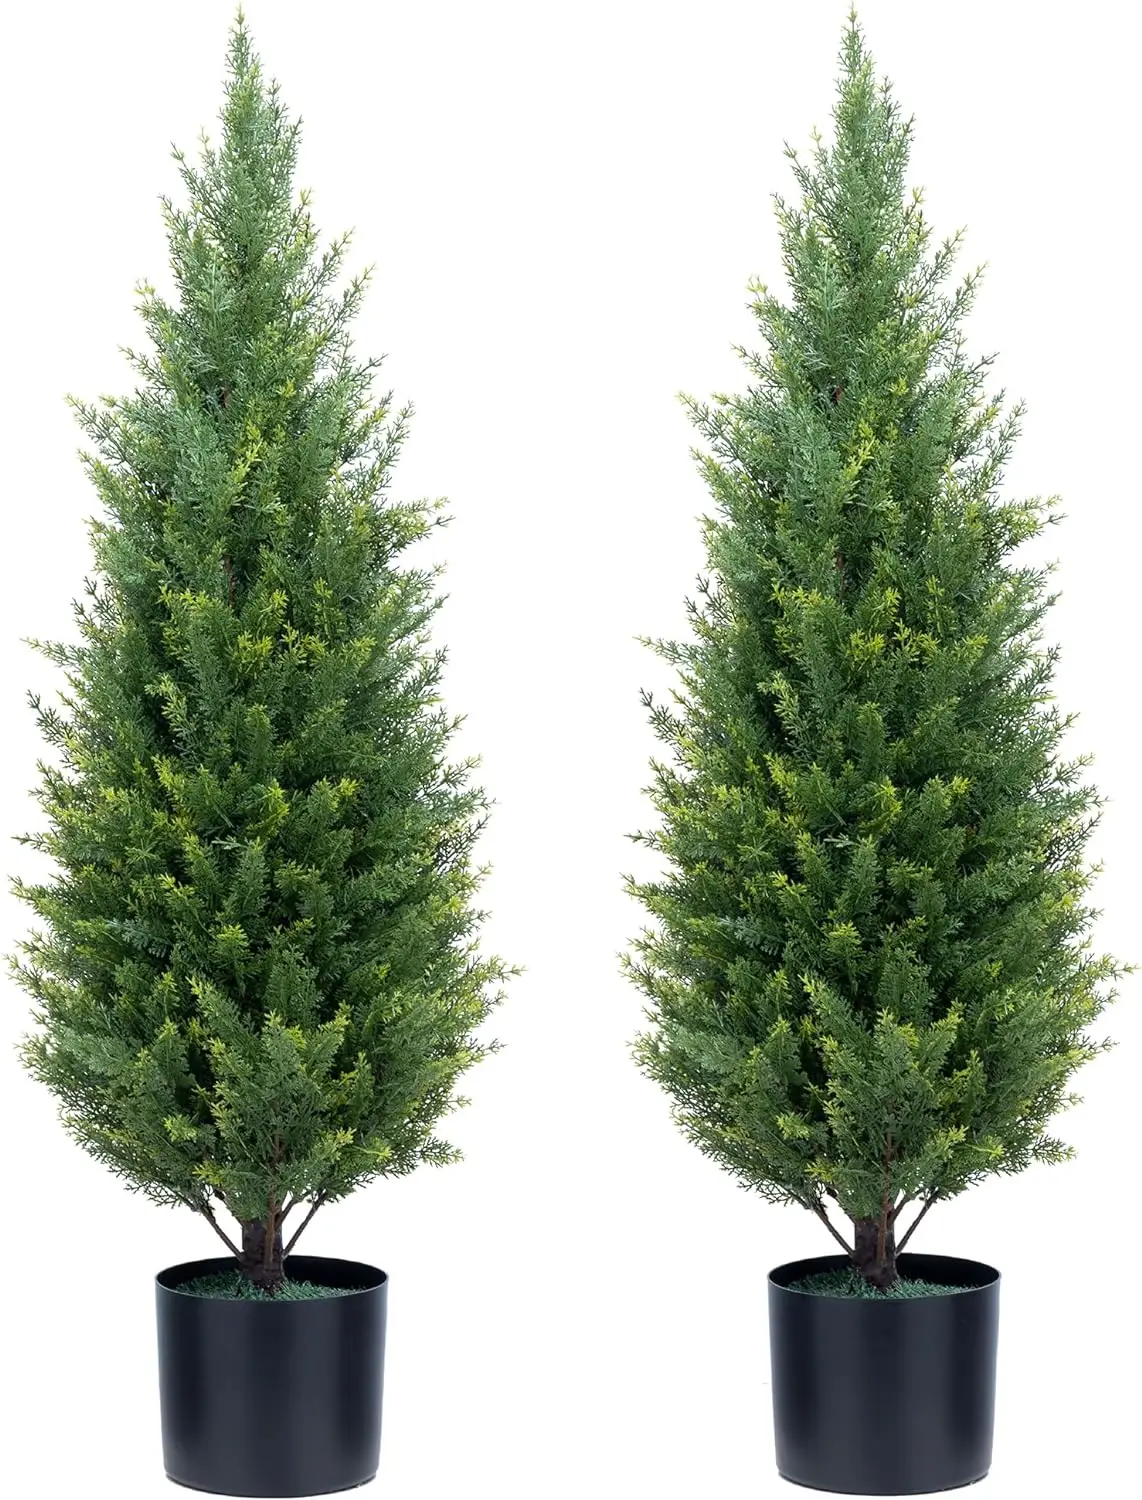 

Artificial Topiary Tree Two 3 Foot Artificial Cedar Trees Outdoor UV Resistant Bushes Potted Plants Artificial Shrubs Tree